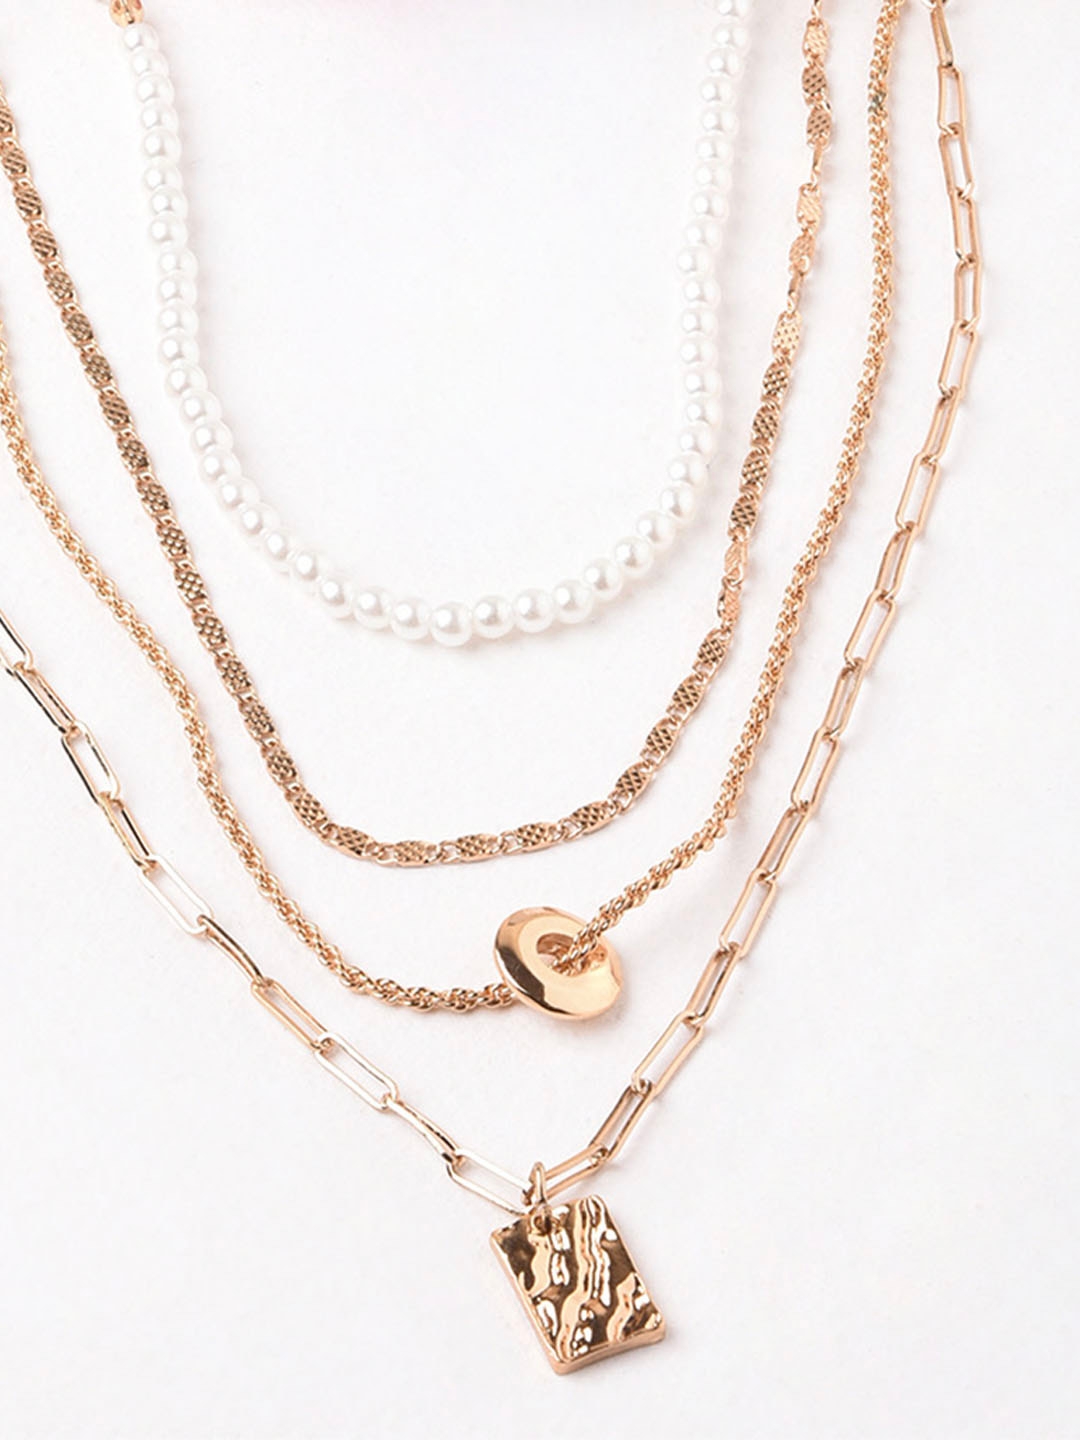 Lilly & sparkle | Lilly & Sparkle Gold Toned Four Layered Pearl Neckalce With Hammered Geometric Charm 3